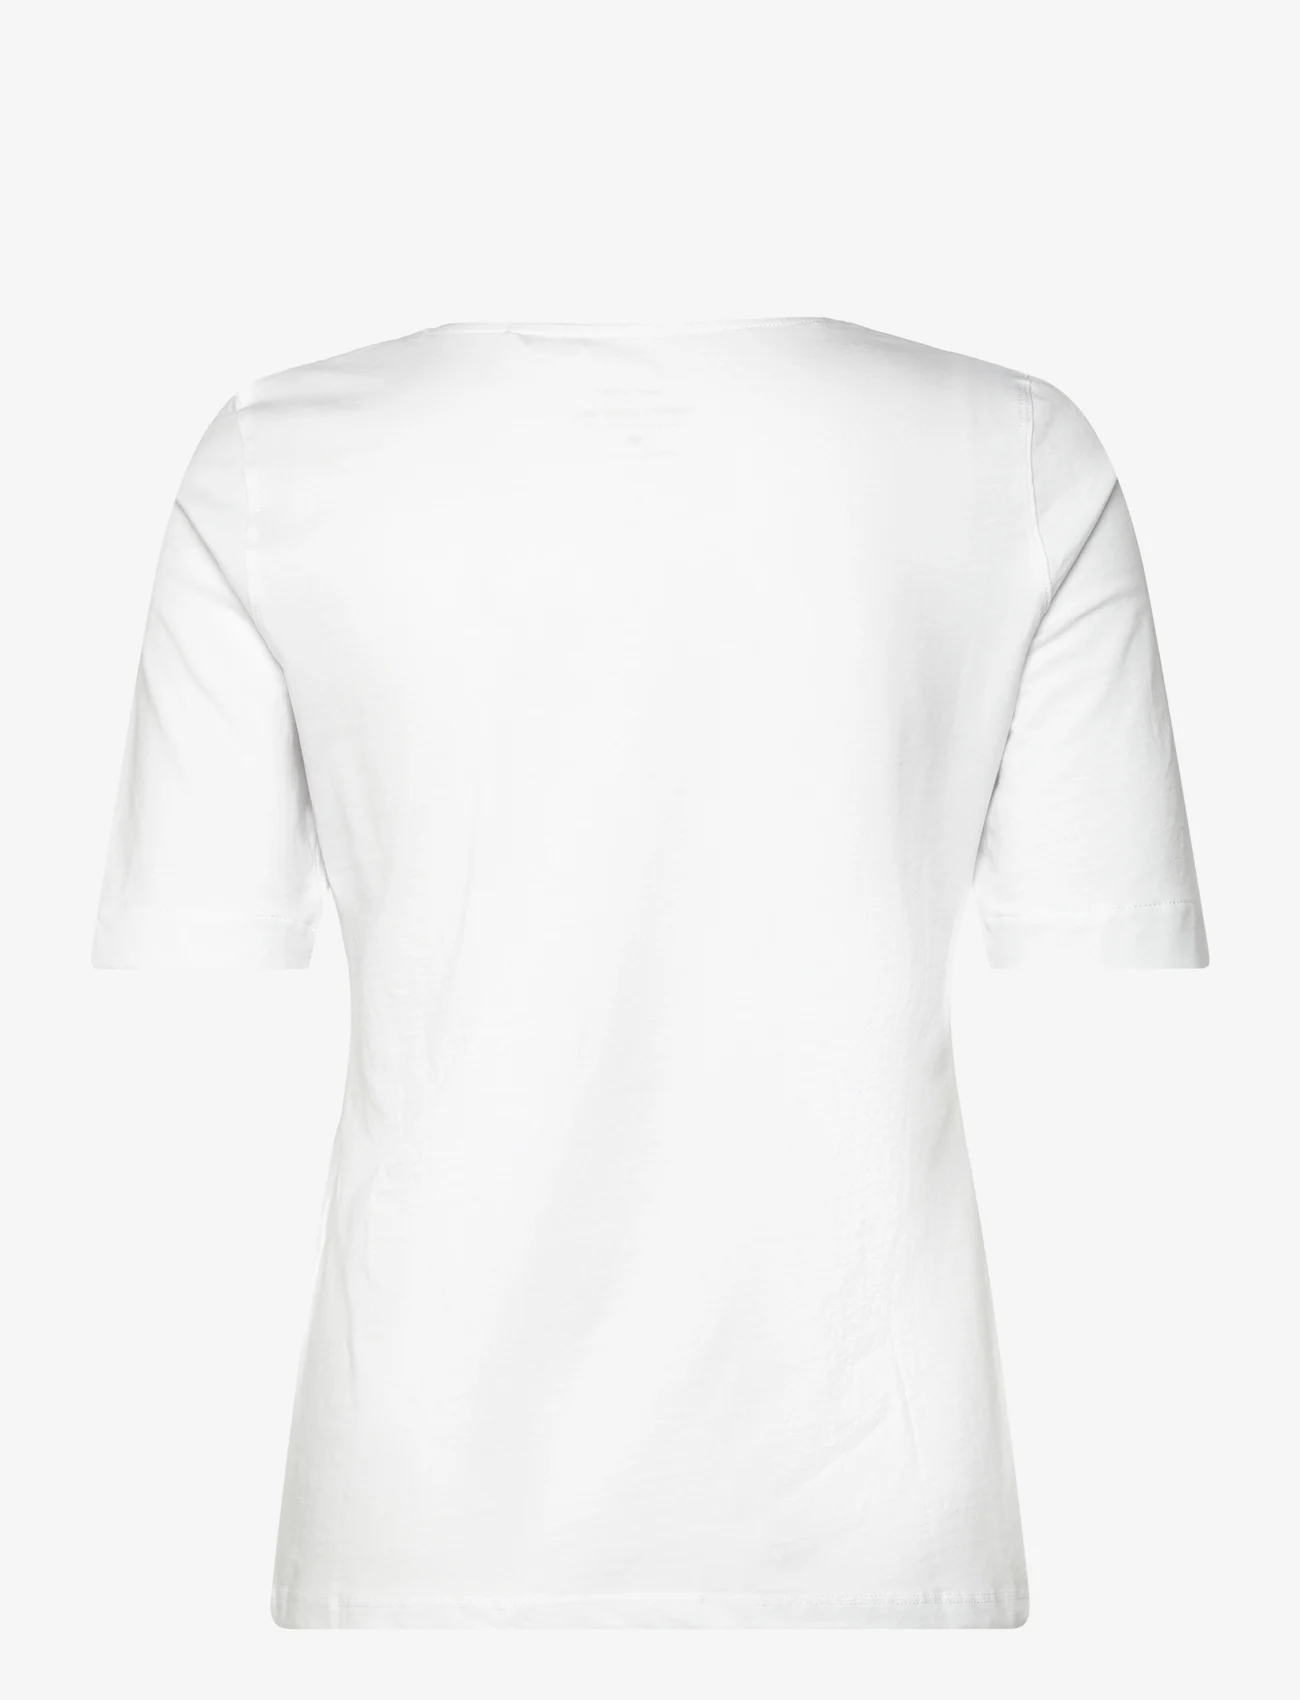 Gerry Weber Edition - T-SHIRT 1/2 SLEEVE - t-shirts & tops - white/white - 1